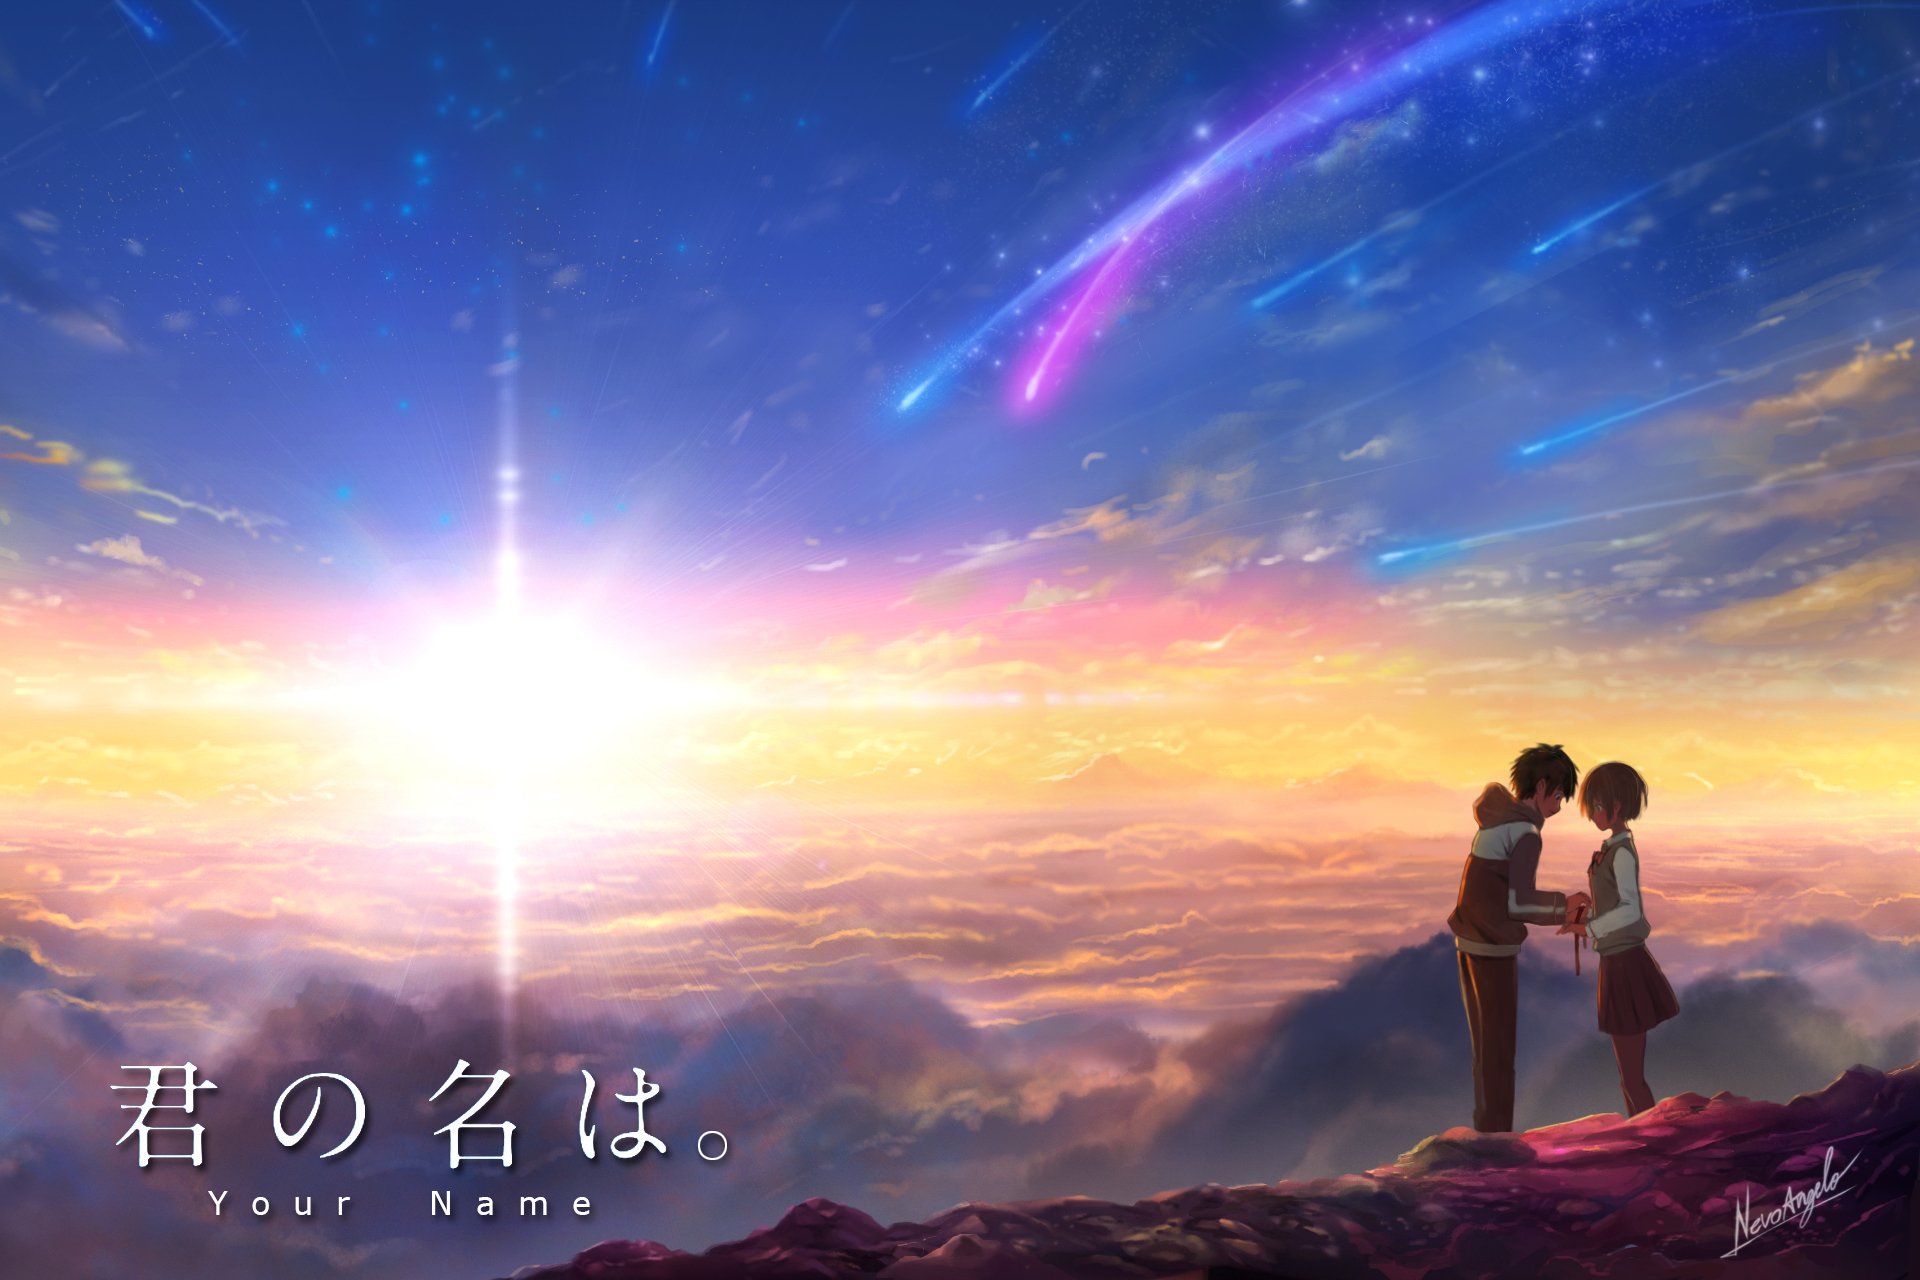  Your  Name  HD Wallpaper  Background  Image 1920x1280 